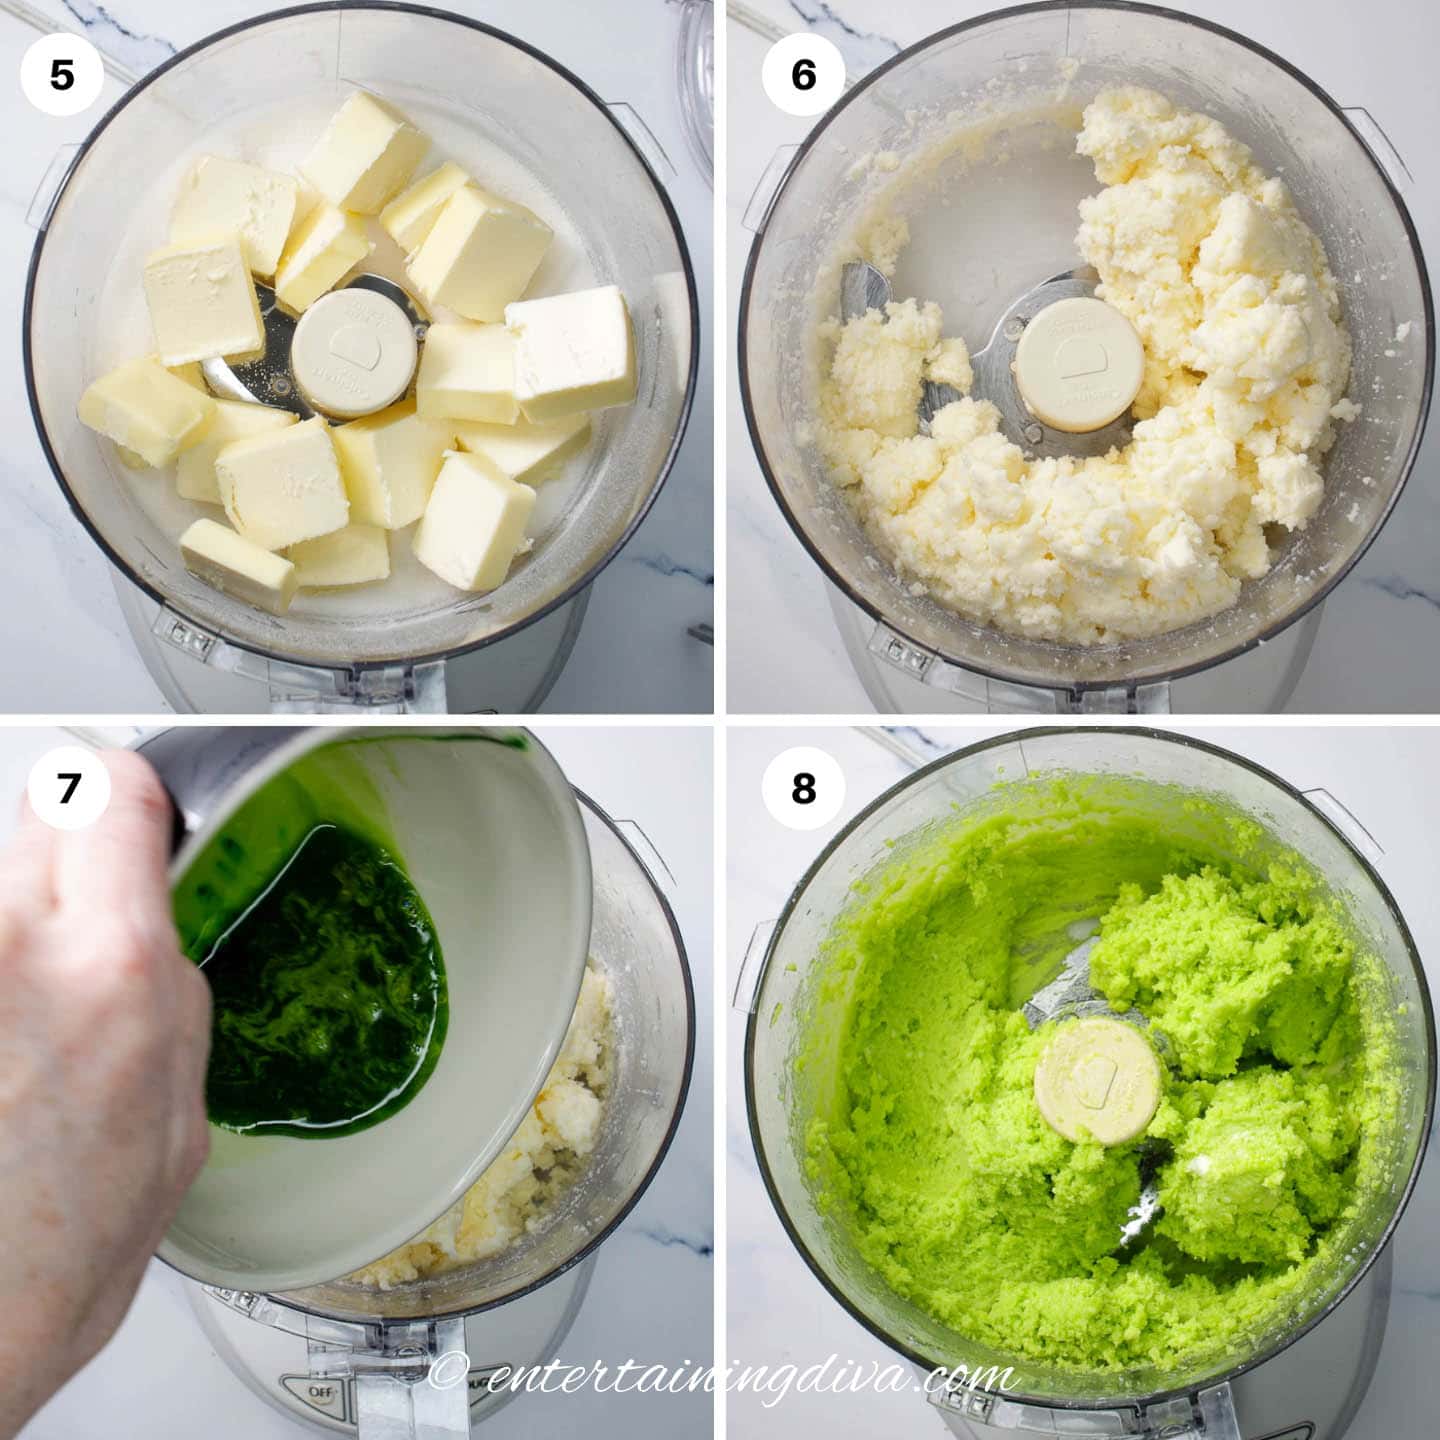 How to blend the butter, salt and green liquid mixture in a food processor